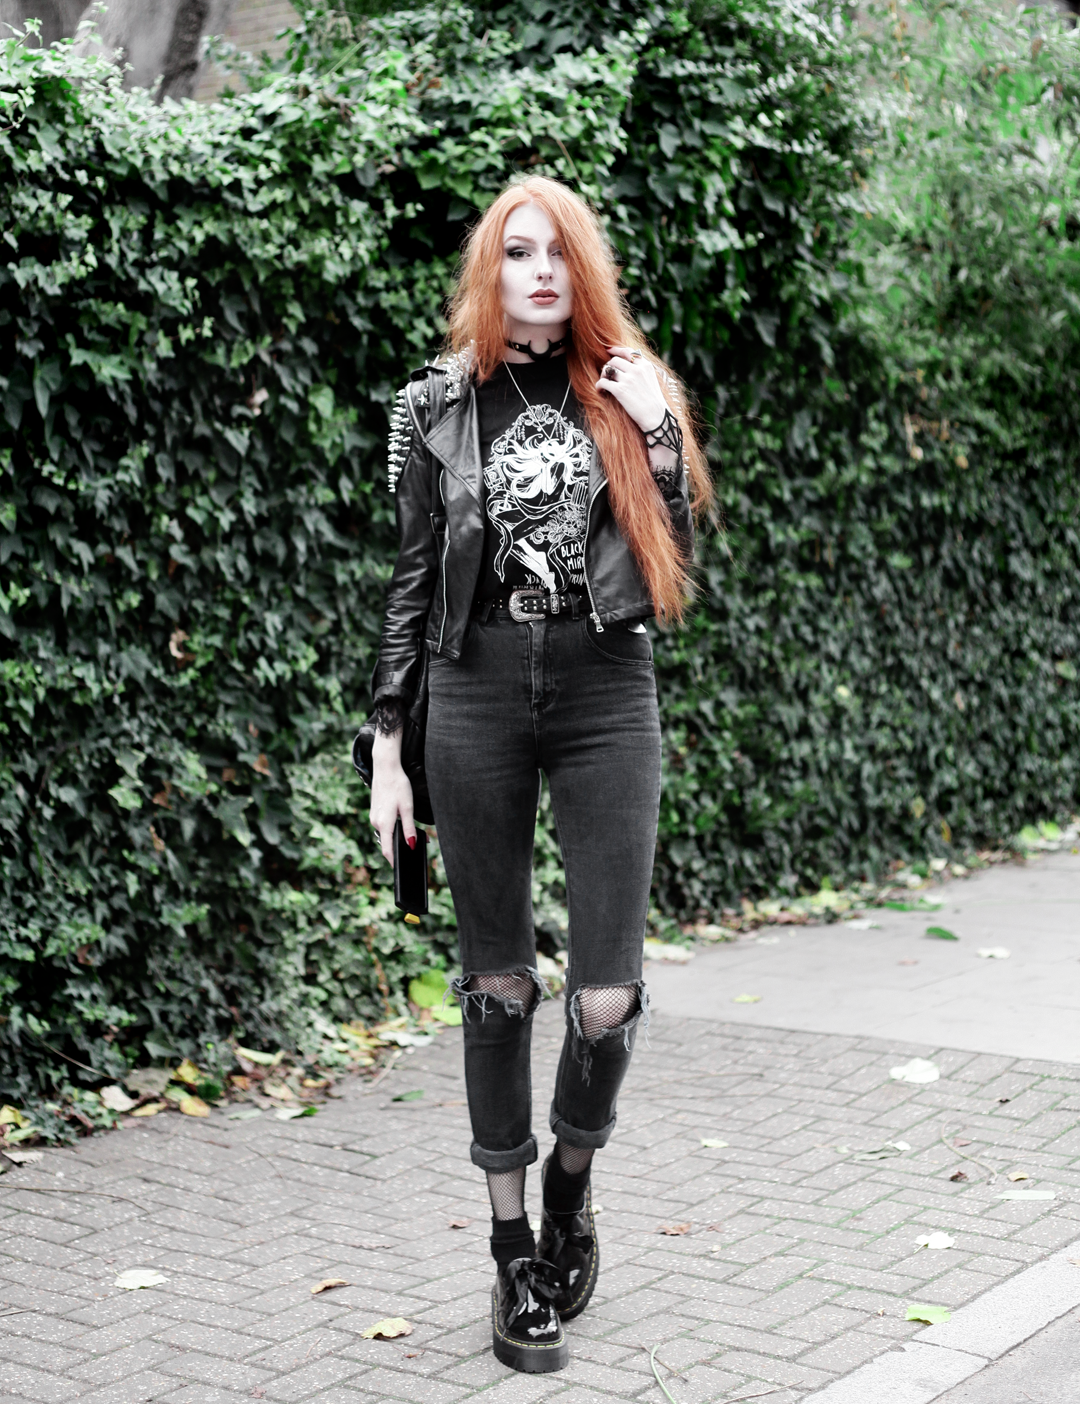 Olivia Emily wears Studded Biker Jacket, CosQueen Black Mirror Princess Tee, Asos Western Belt, Asos High Waisted Ripped Jeans, Dr Martens Patent Holly Shoes